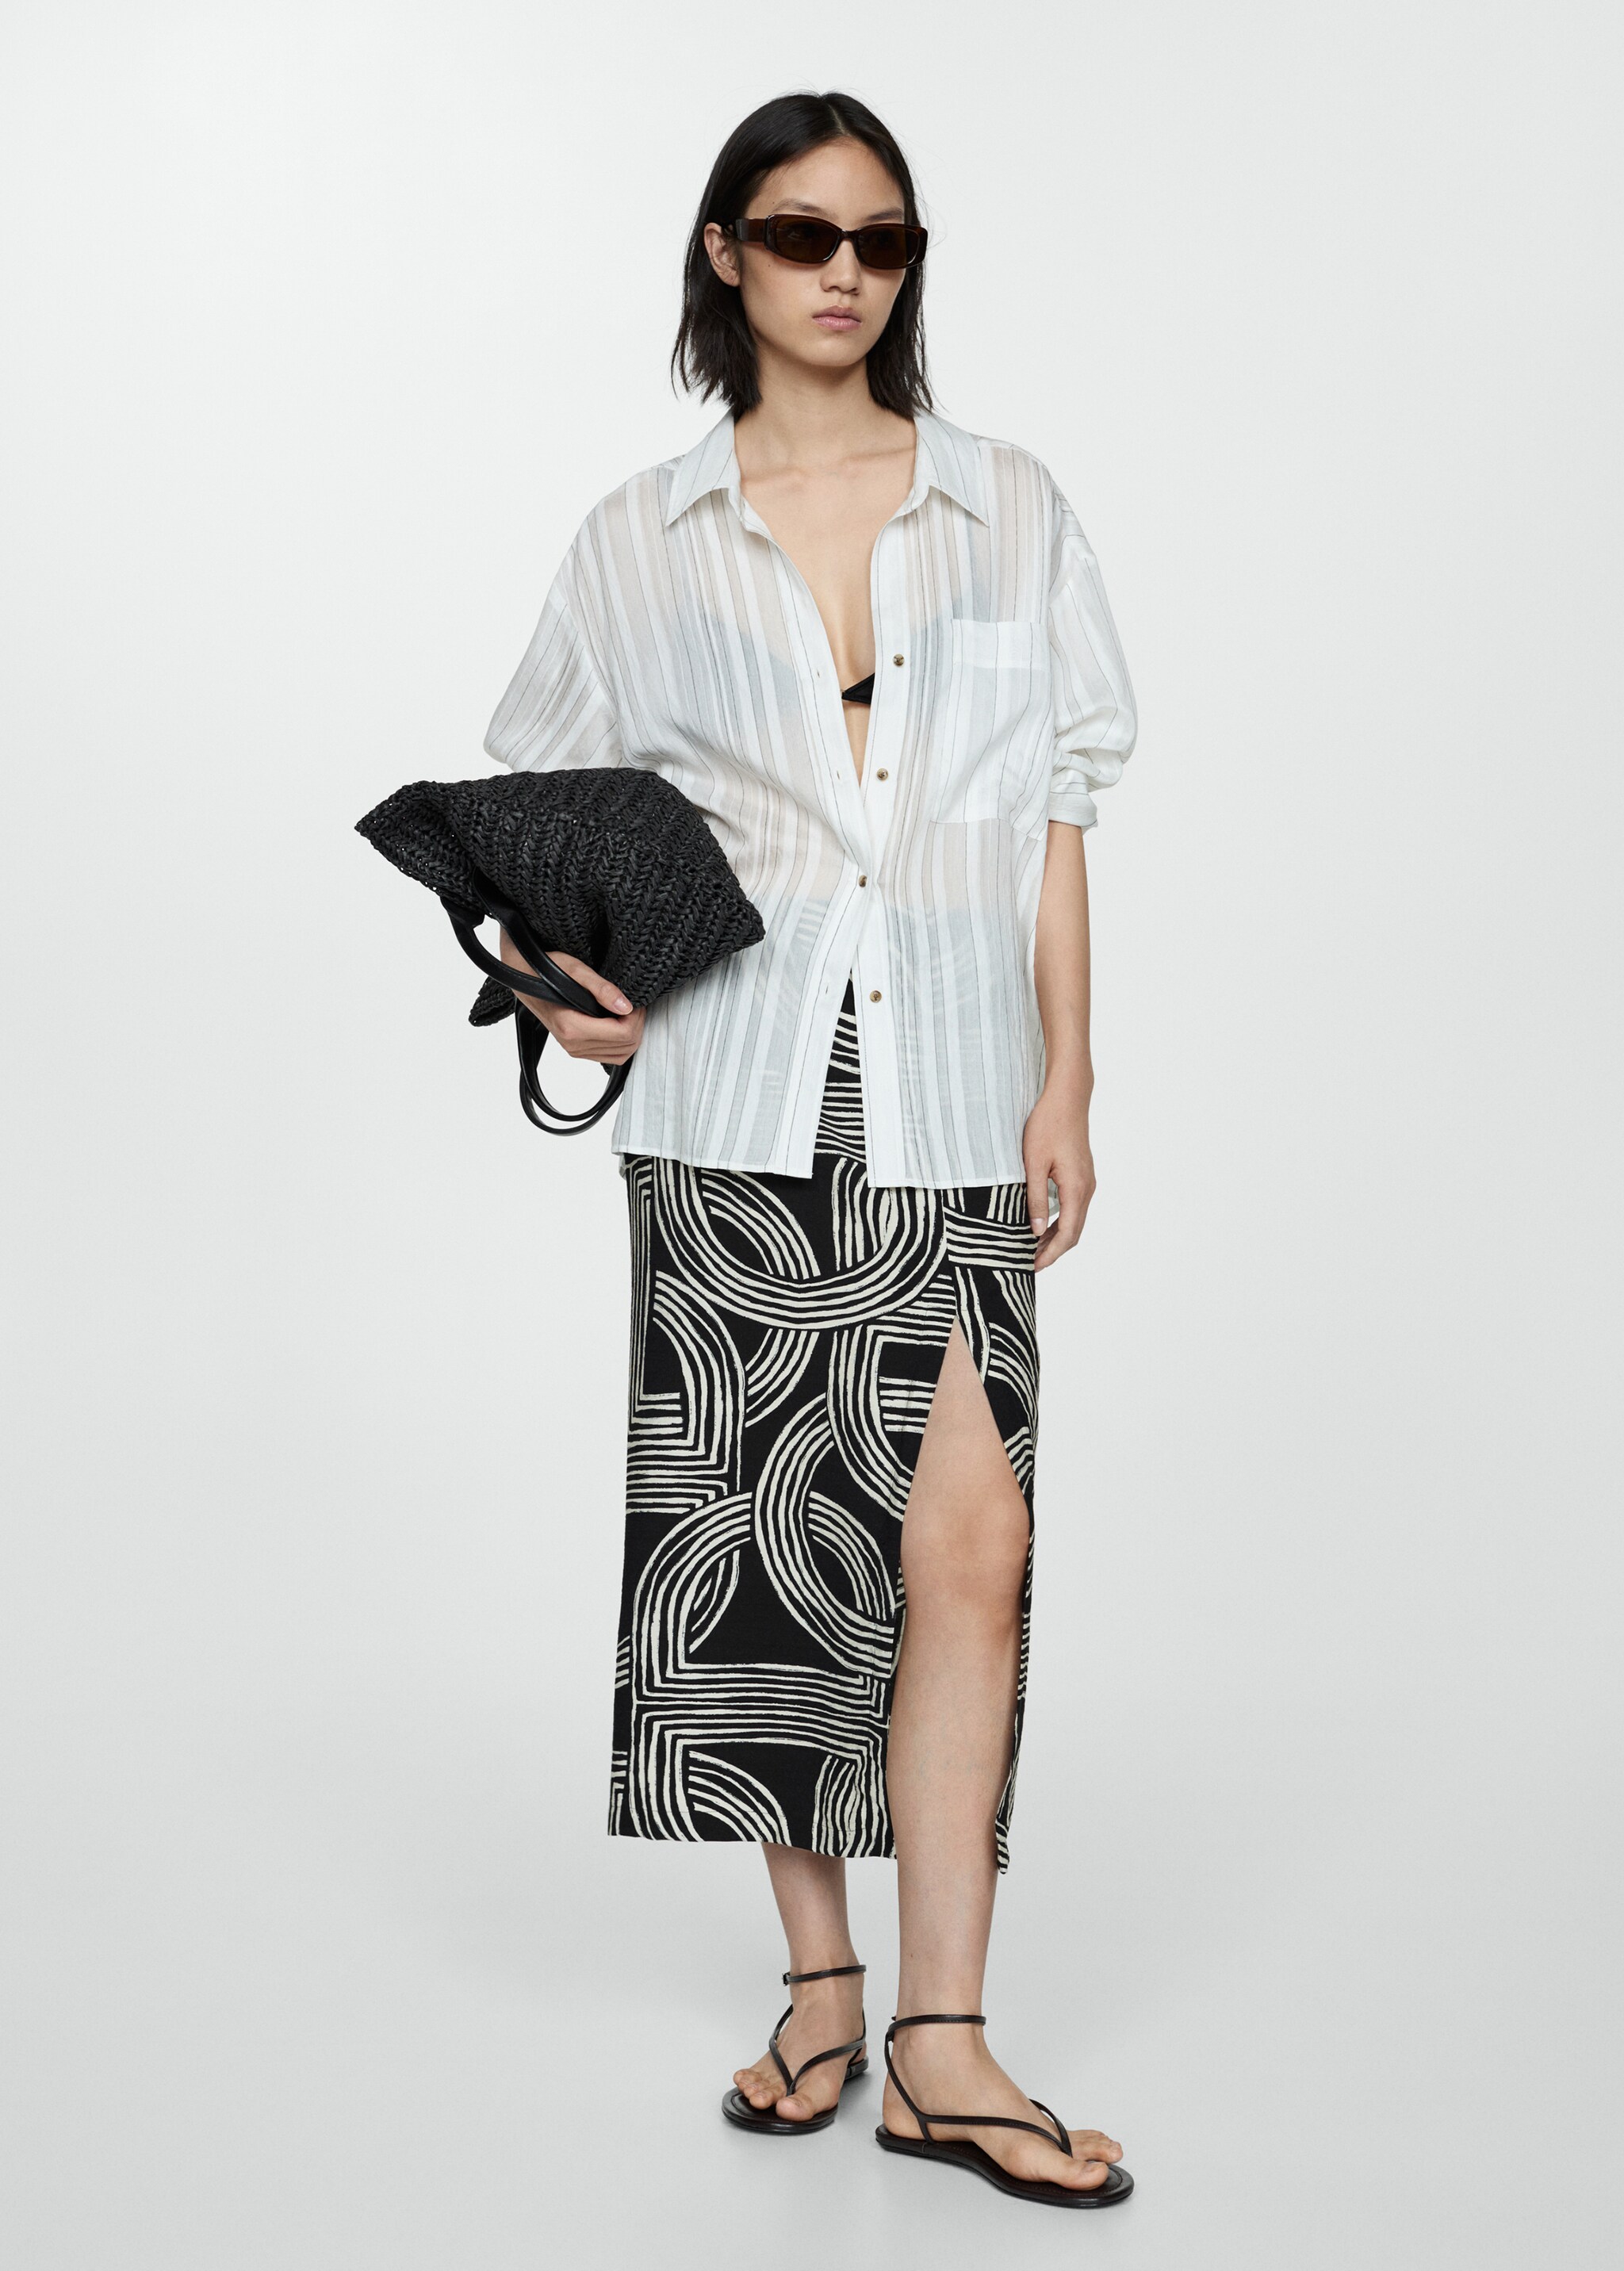 Printed skirt with slit - General plane